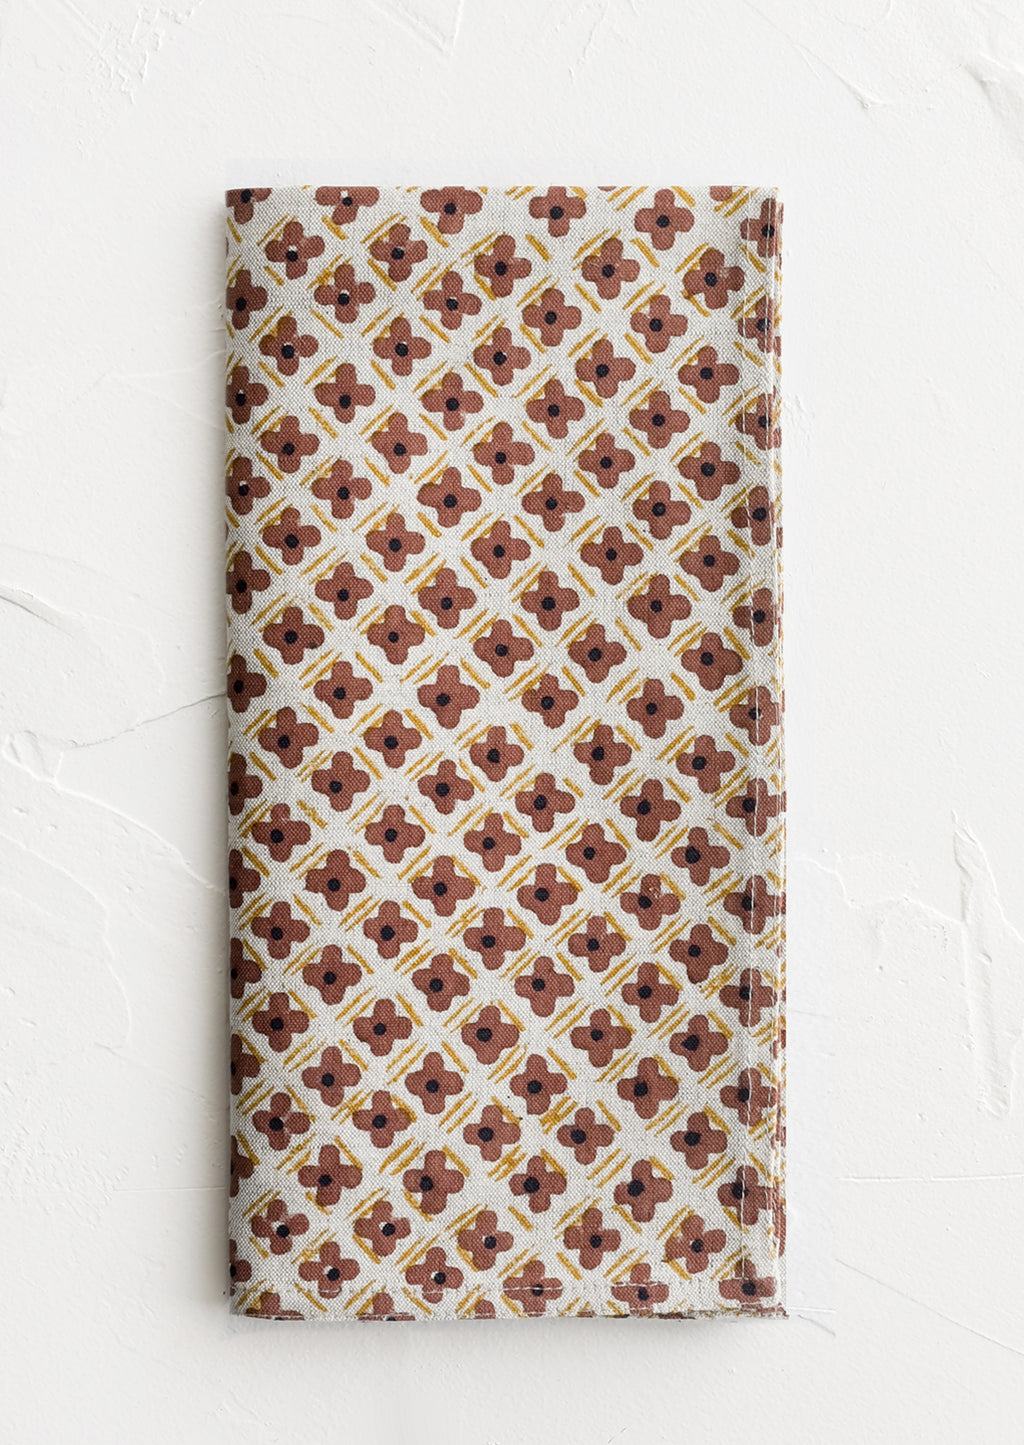 Clay Multi: A block printed napkin with clay and yellow floral print.